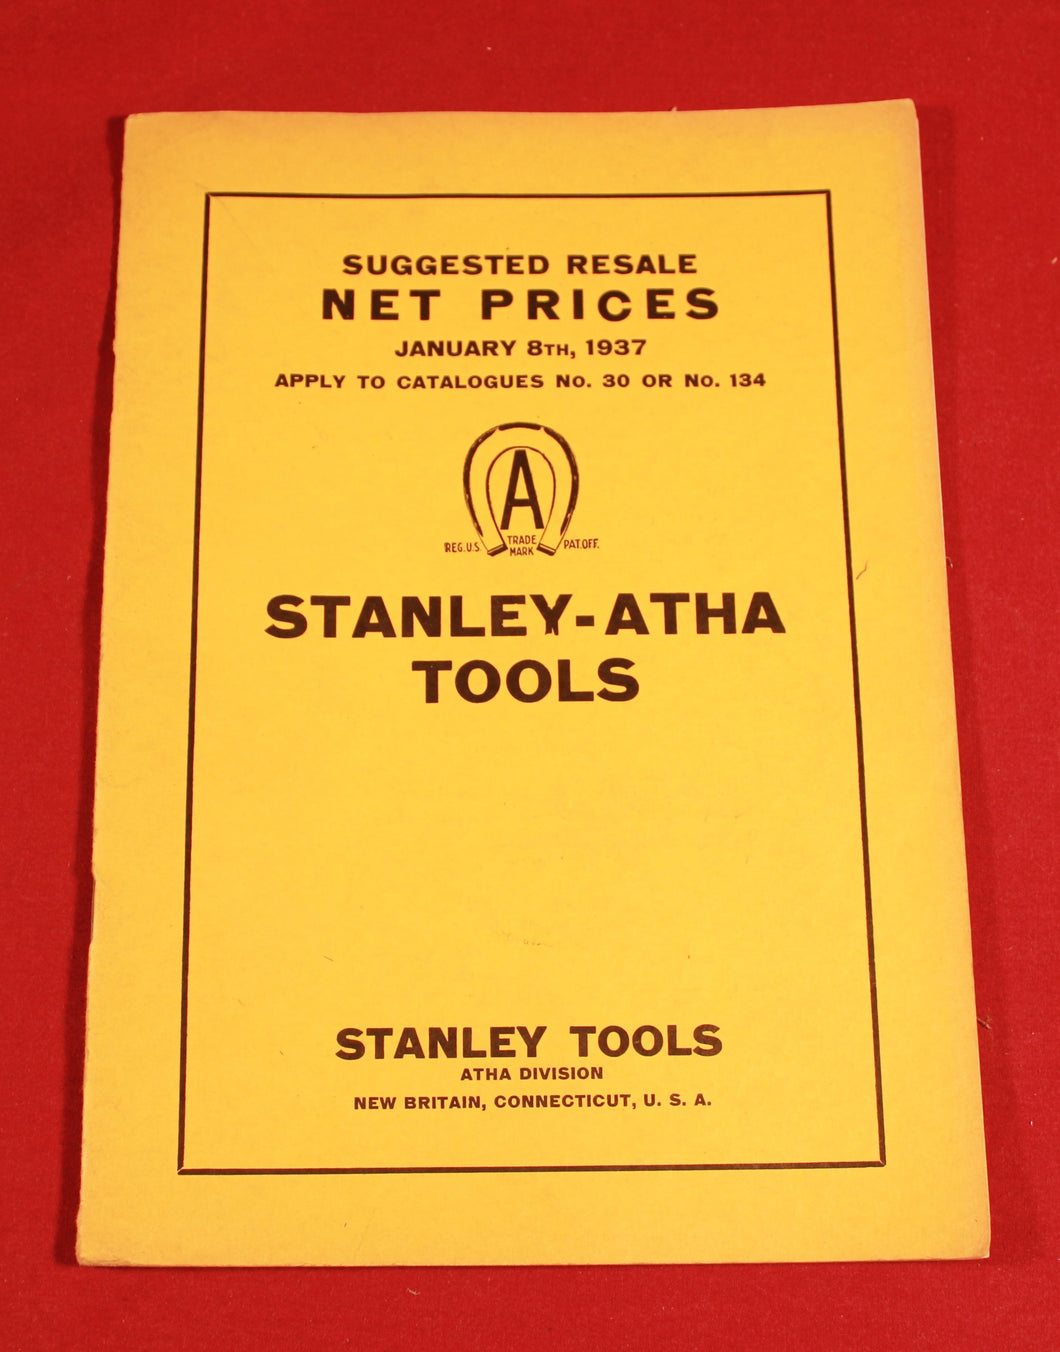 Stanley-Atha Tools Hardware Distributor Net Prices Eff. January 8th, 1937